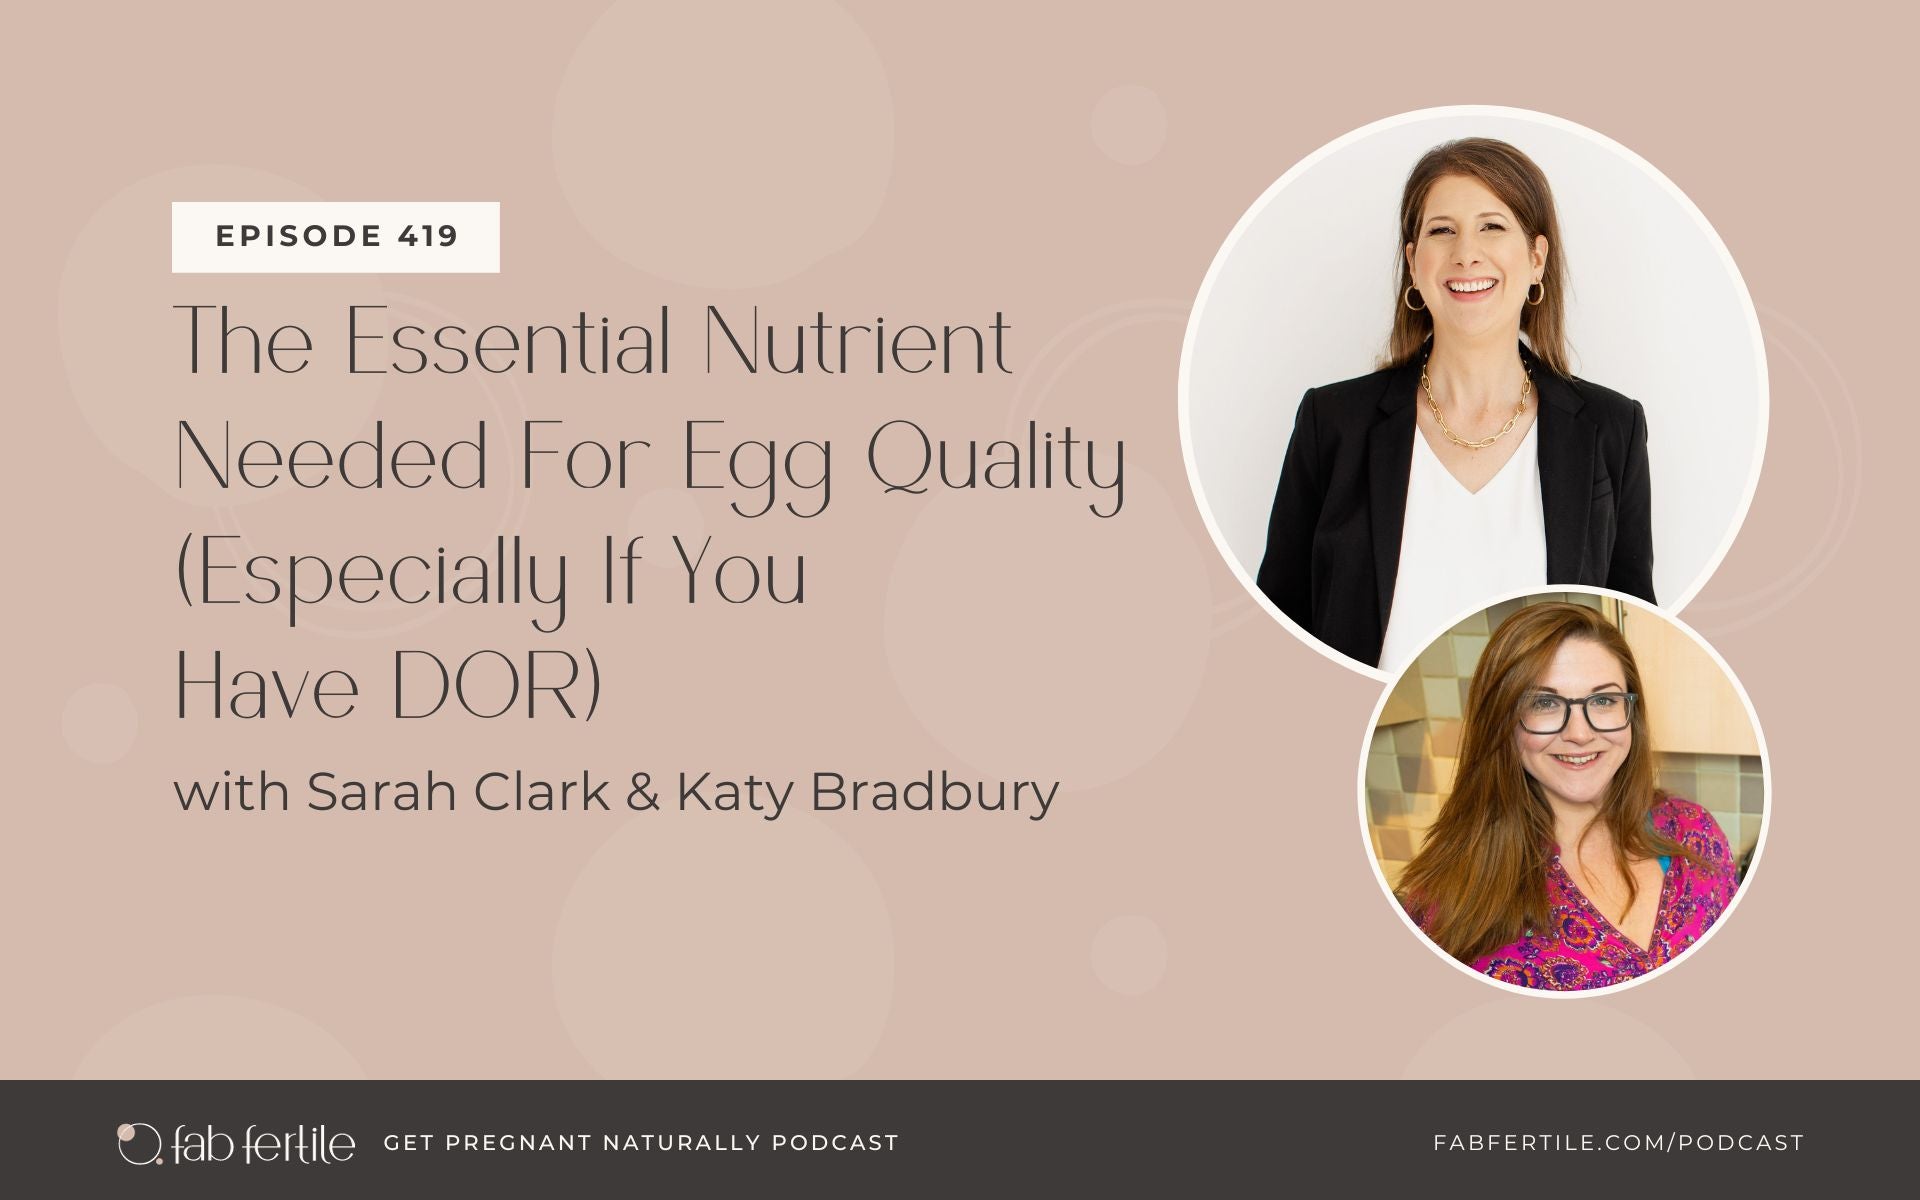 The Essential Nutrient Needed For Egg Quality (Especially If You Have DOR)